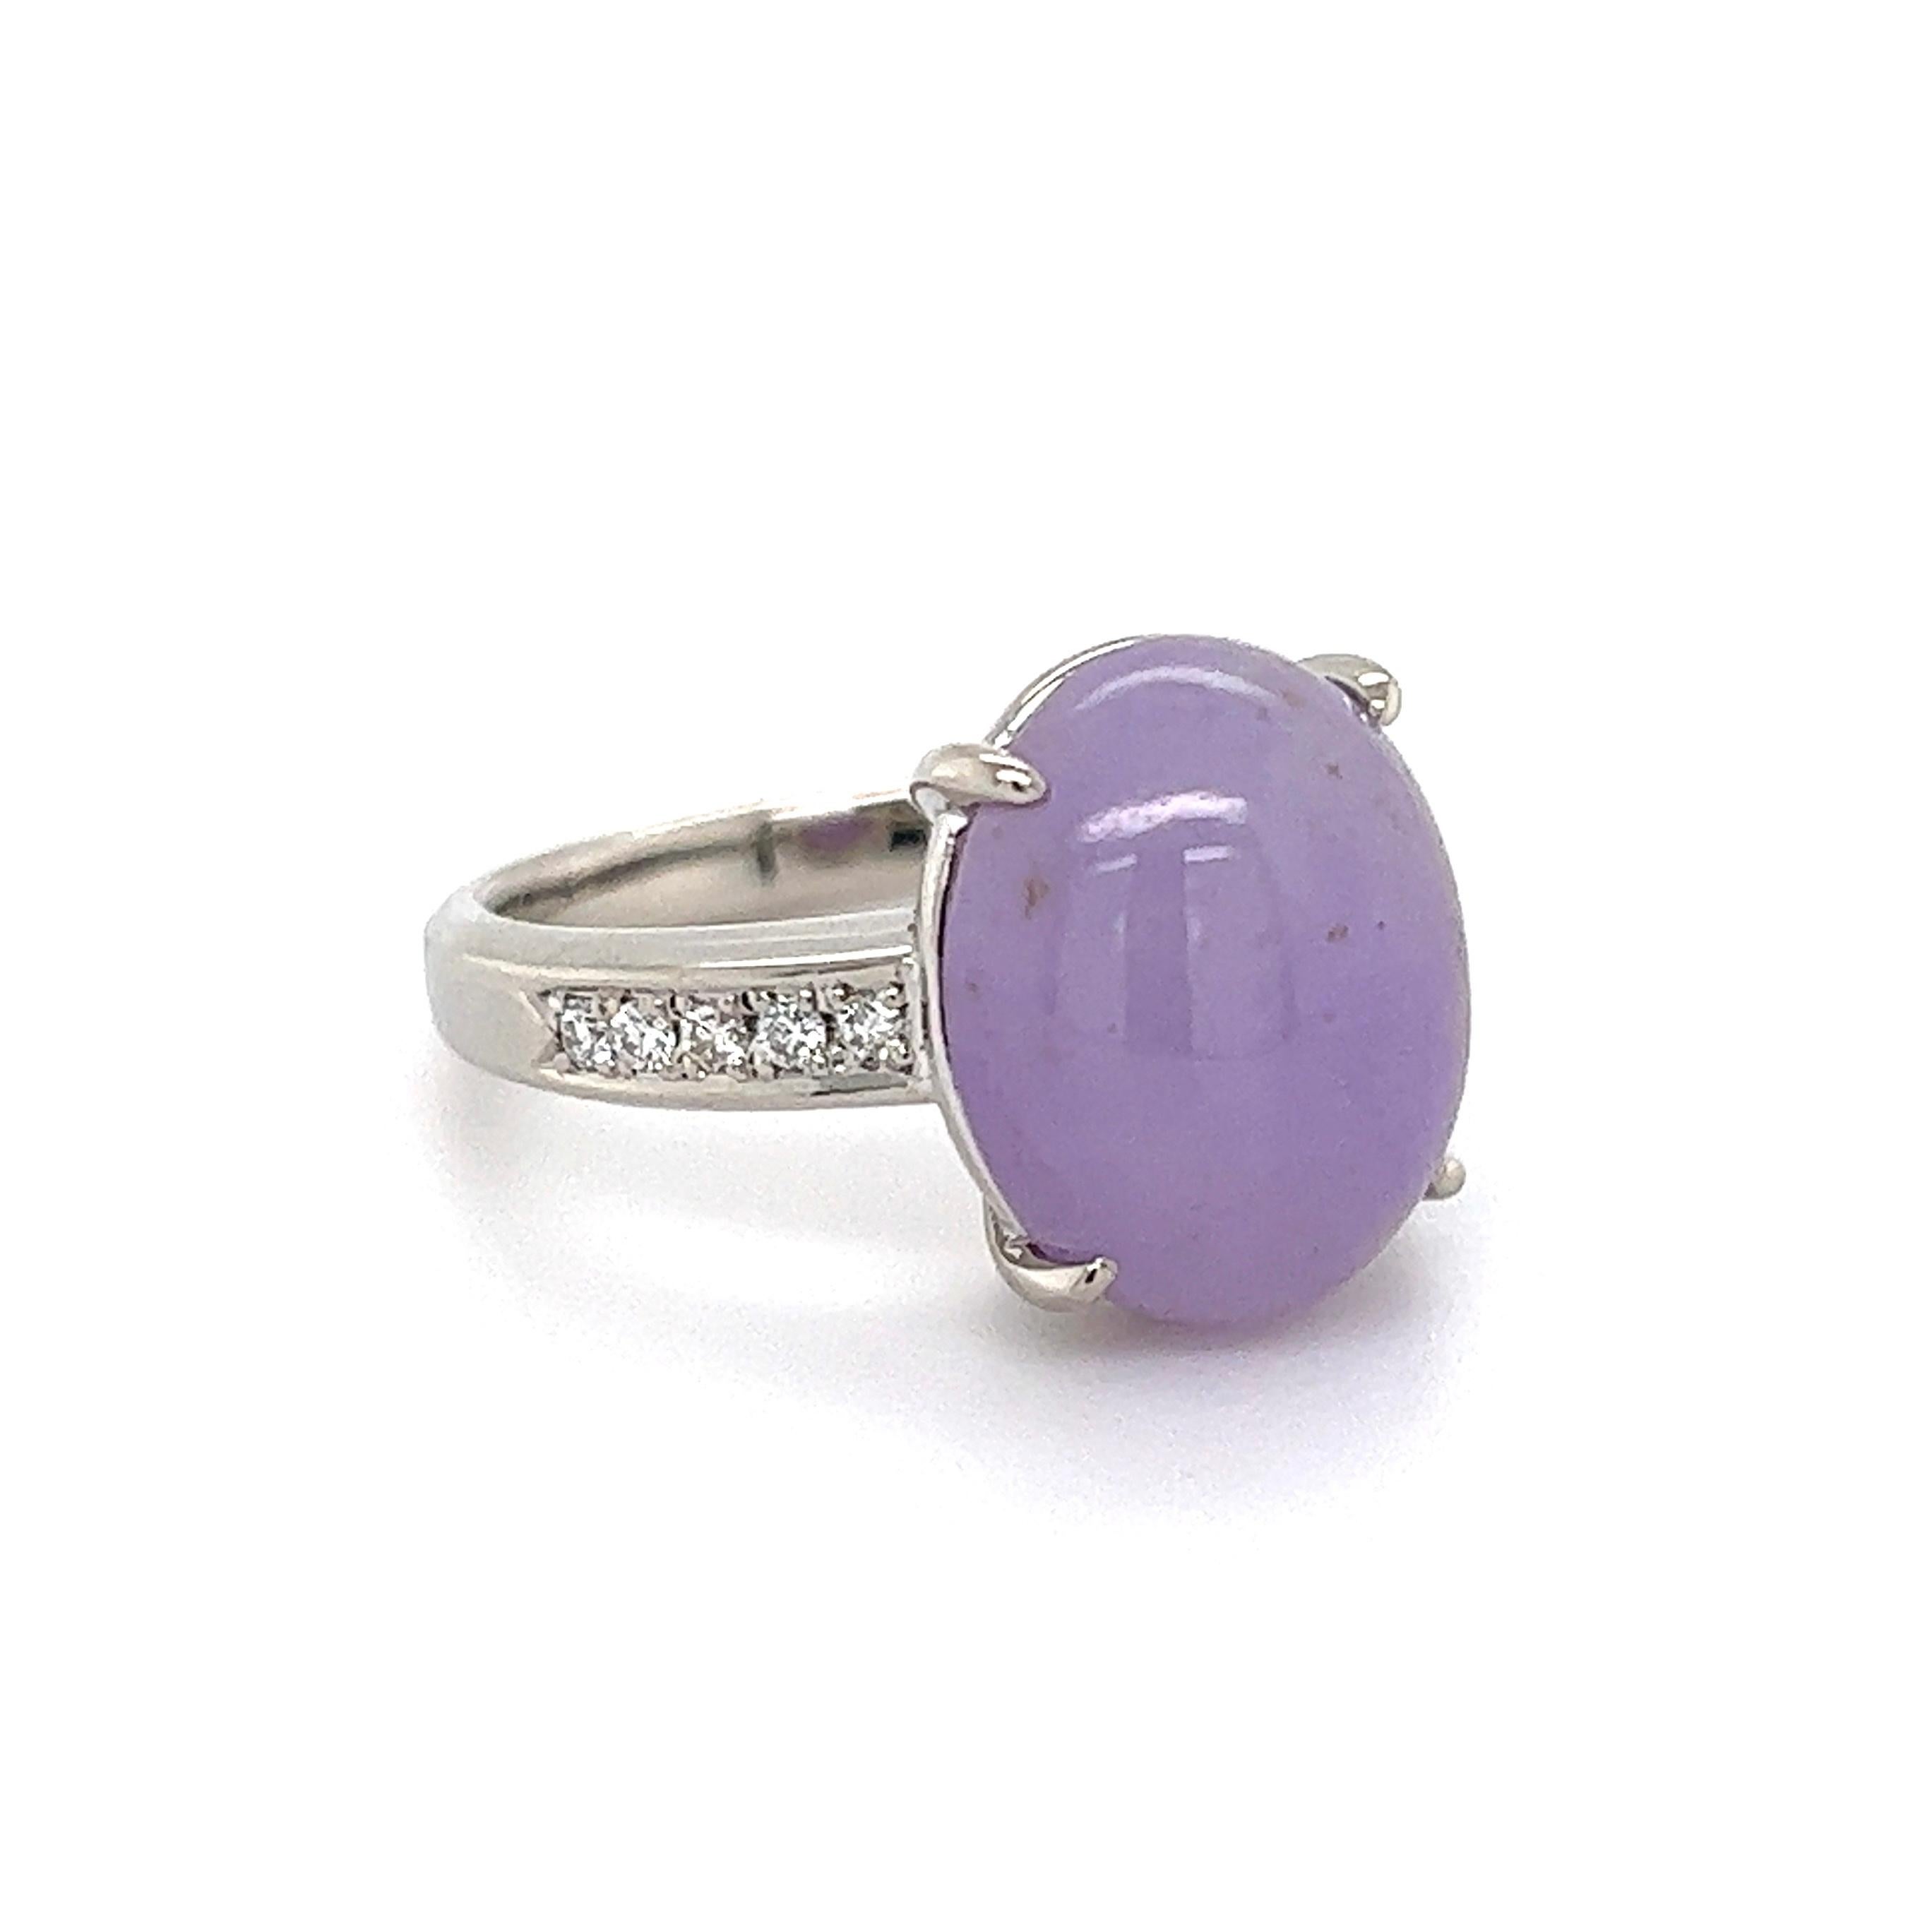 Simply Beautiful! Fnely detailed Lavender Jade and Diamond Cocktail Ring. Center securely set with an awesome 8.14 Carat Cabochon Lavender Jade, accented either side with Diamonds, weighing approx. 0.12tcw. Hand crafted Platinum mounting. Approx.